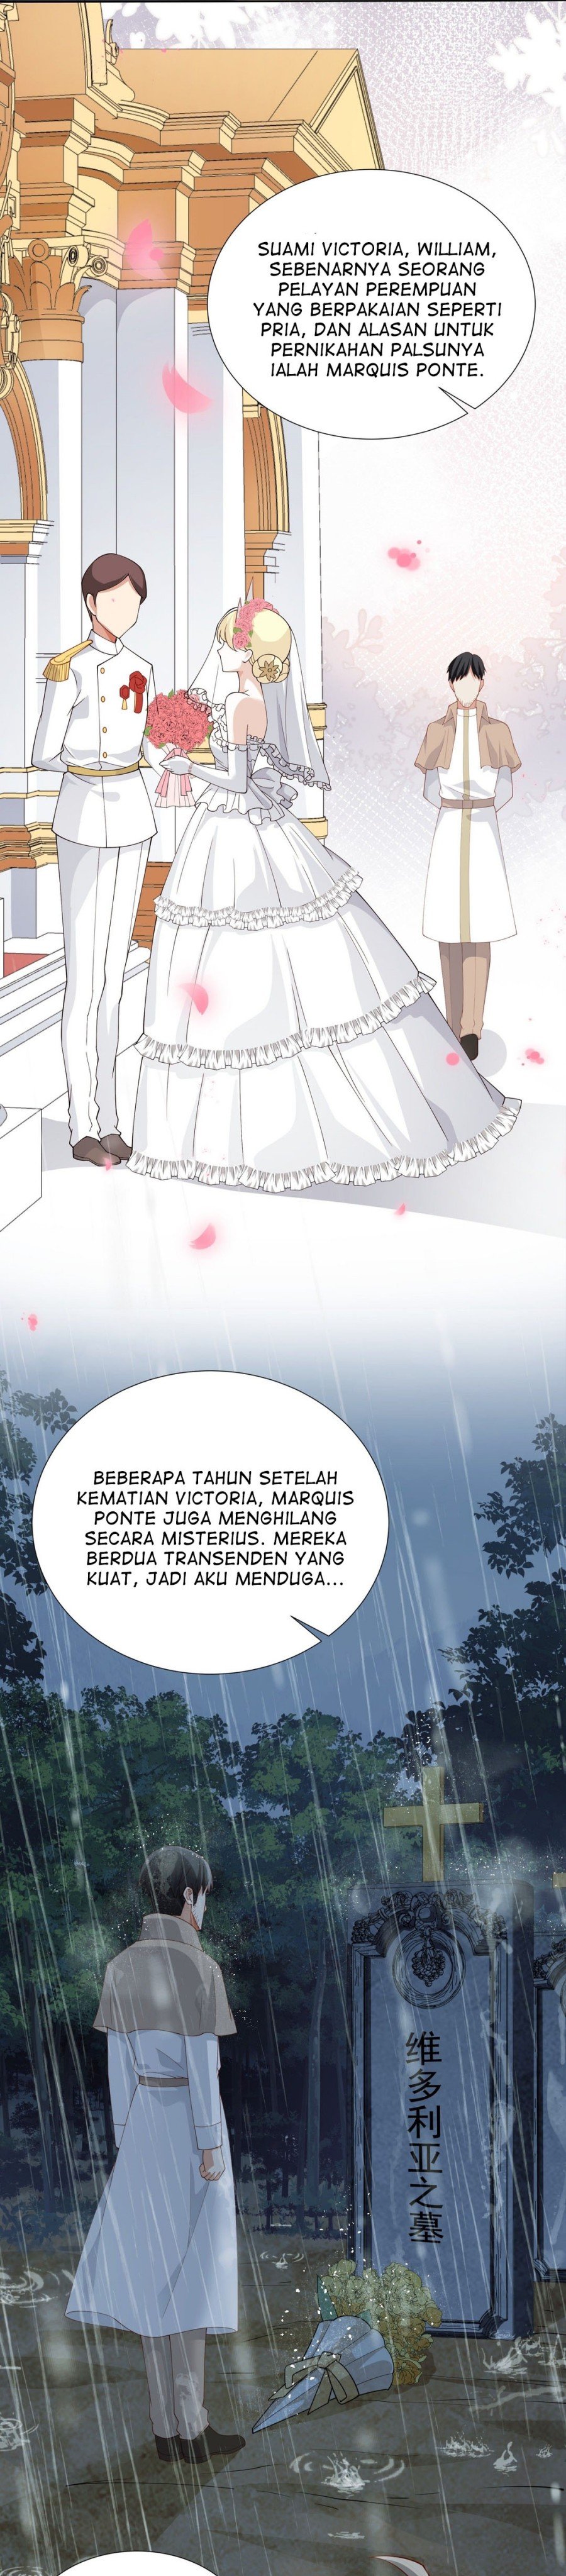 Dilarang COPAS - situs resmi www.mangacanblog.com - Komik little tyrant doesnt want to meet with a bad end 027 - chapter 27 28 Indonesia little tyrant doesnt want to meet with a bad end 027 - chapter 27 Terbaru 29|Baca Manga Komik Indonesia|Mangacan